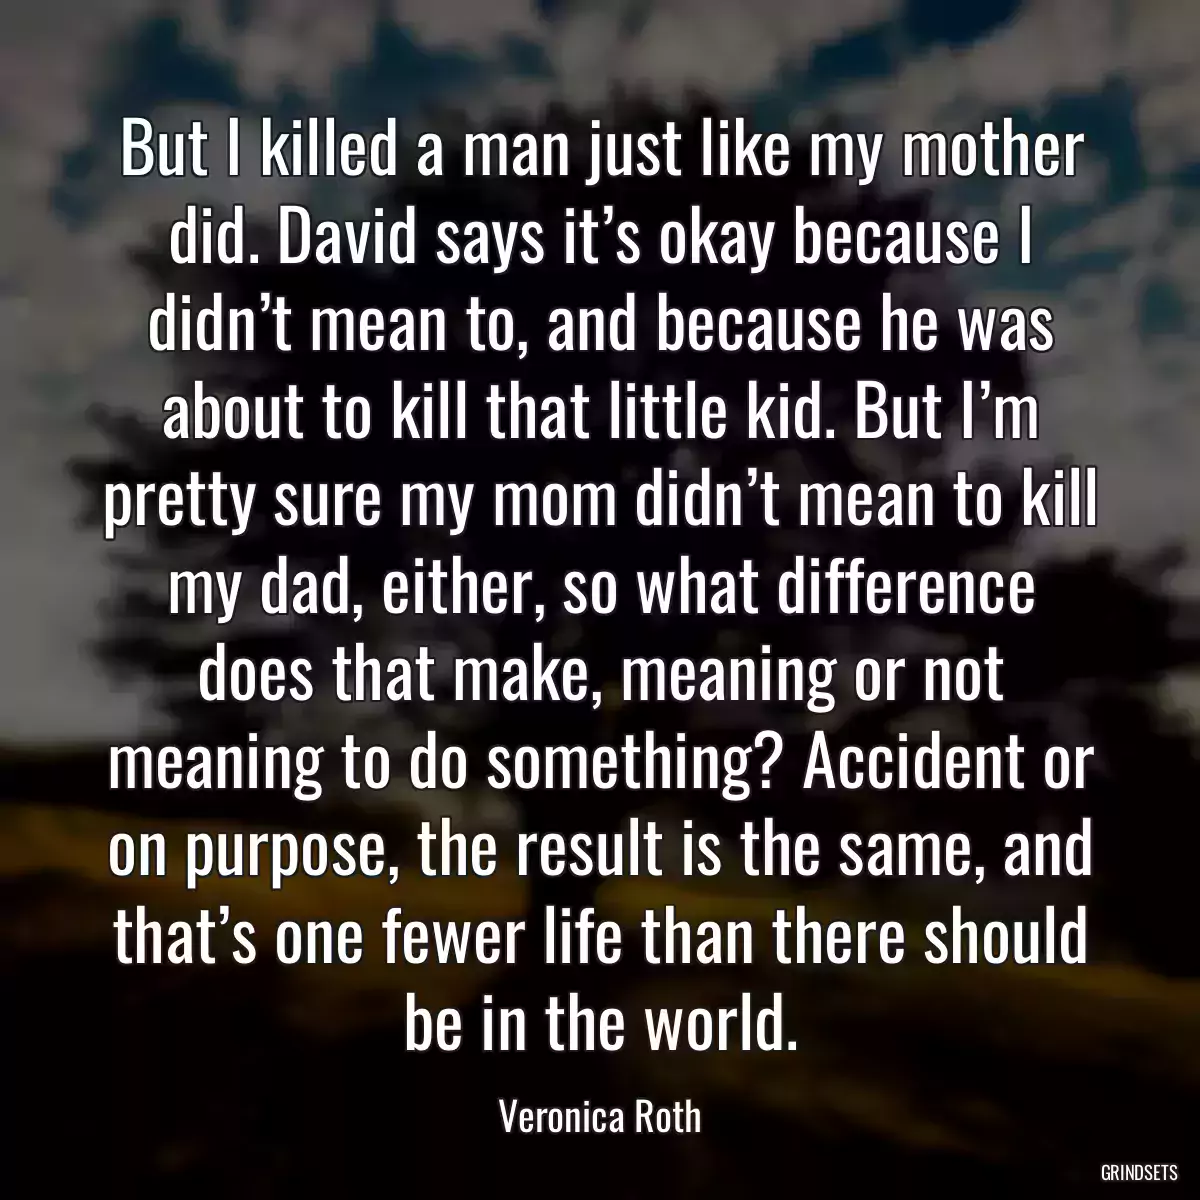 But I killed a man just like my mother did. David says it’s okay because I didn’t mean to, and because he was about to kill that little kid. But I’m pretty sure my mom didn’t mean to kill my dad, either, so what difference does that make, meaning or not meaning to do something? Accident or on purpose, the result is the same, and that’s one fewer life than there should be in the world.